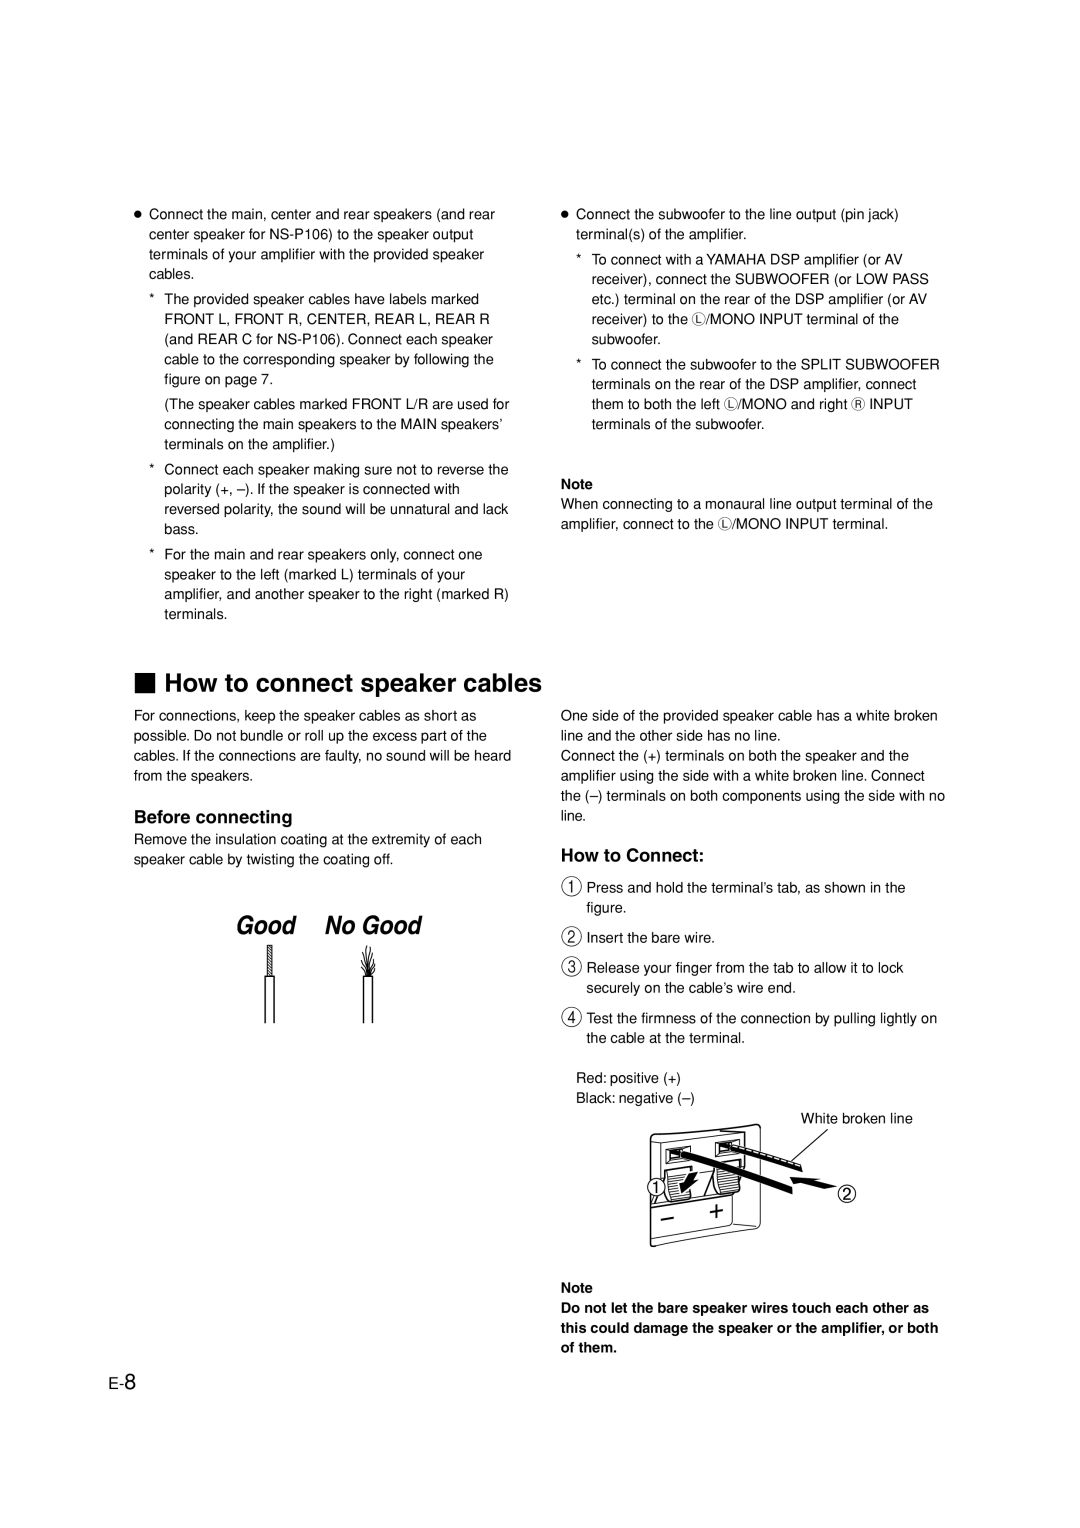 Yamaha HTR-5630RDS owner manual  How to connect speaker cables, Before connecting, How to Connect 